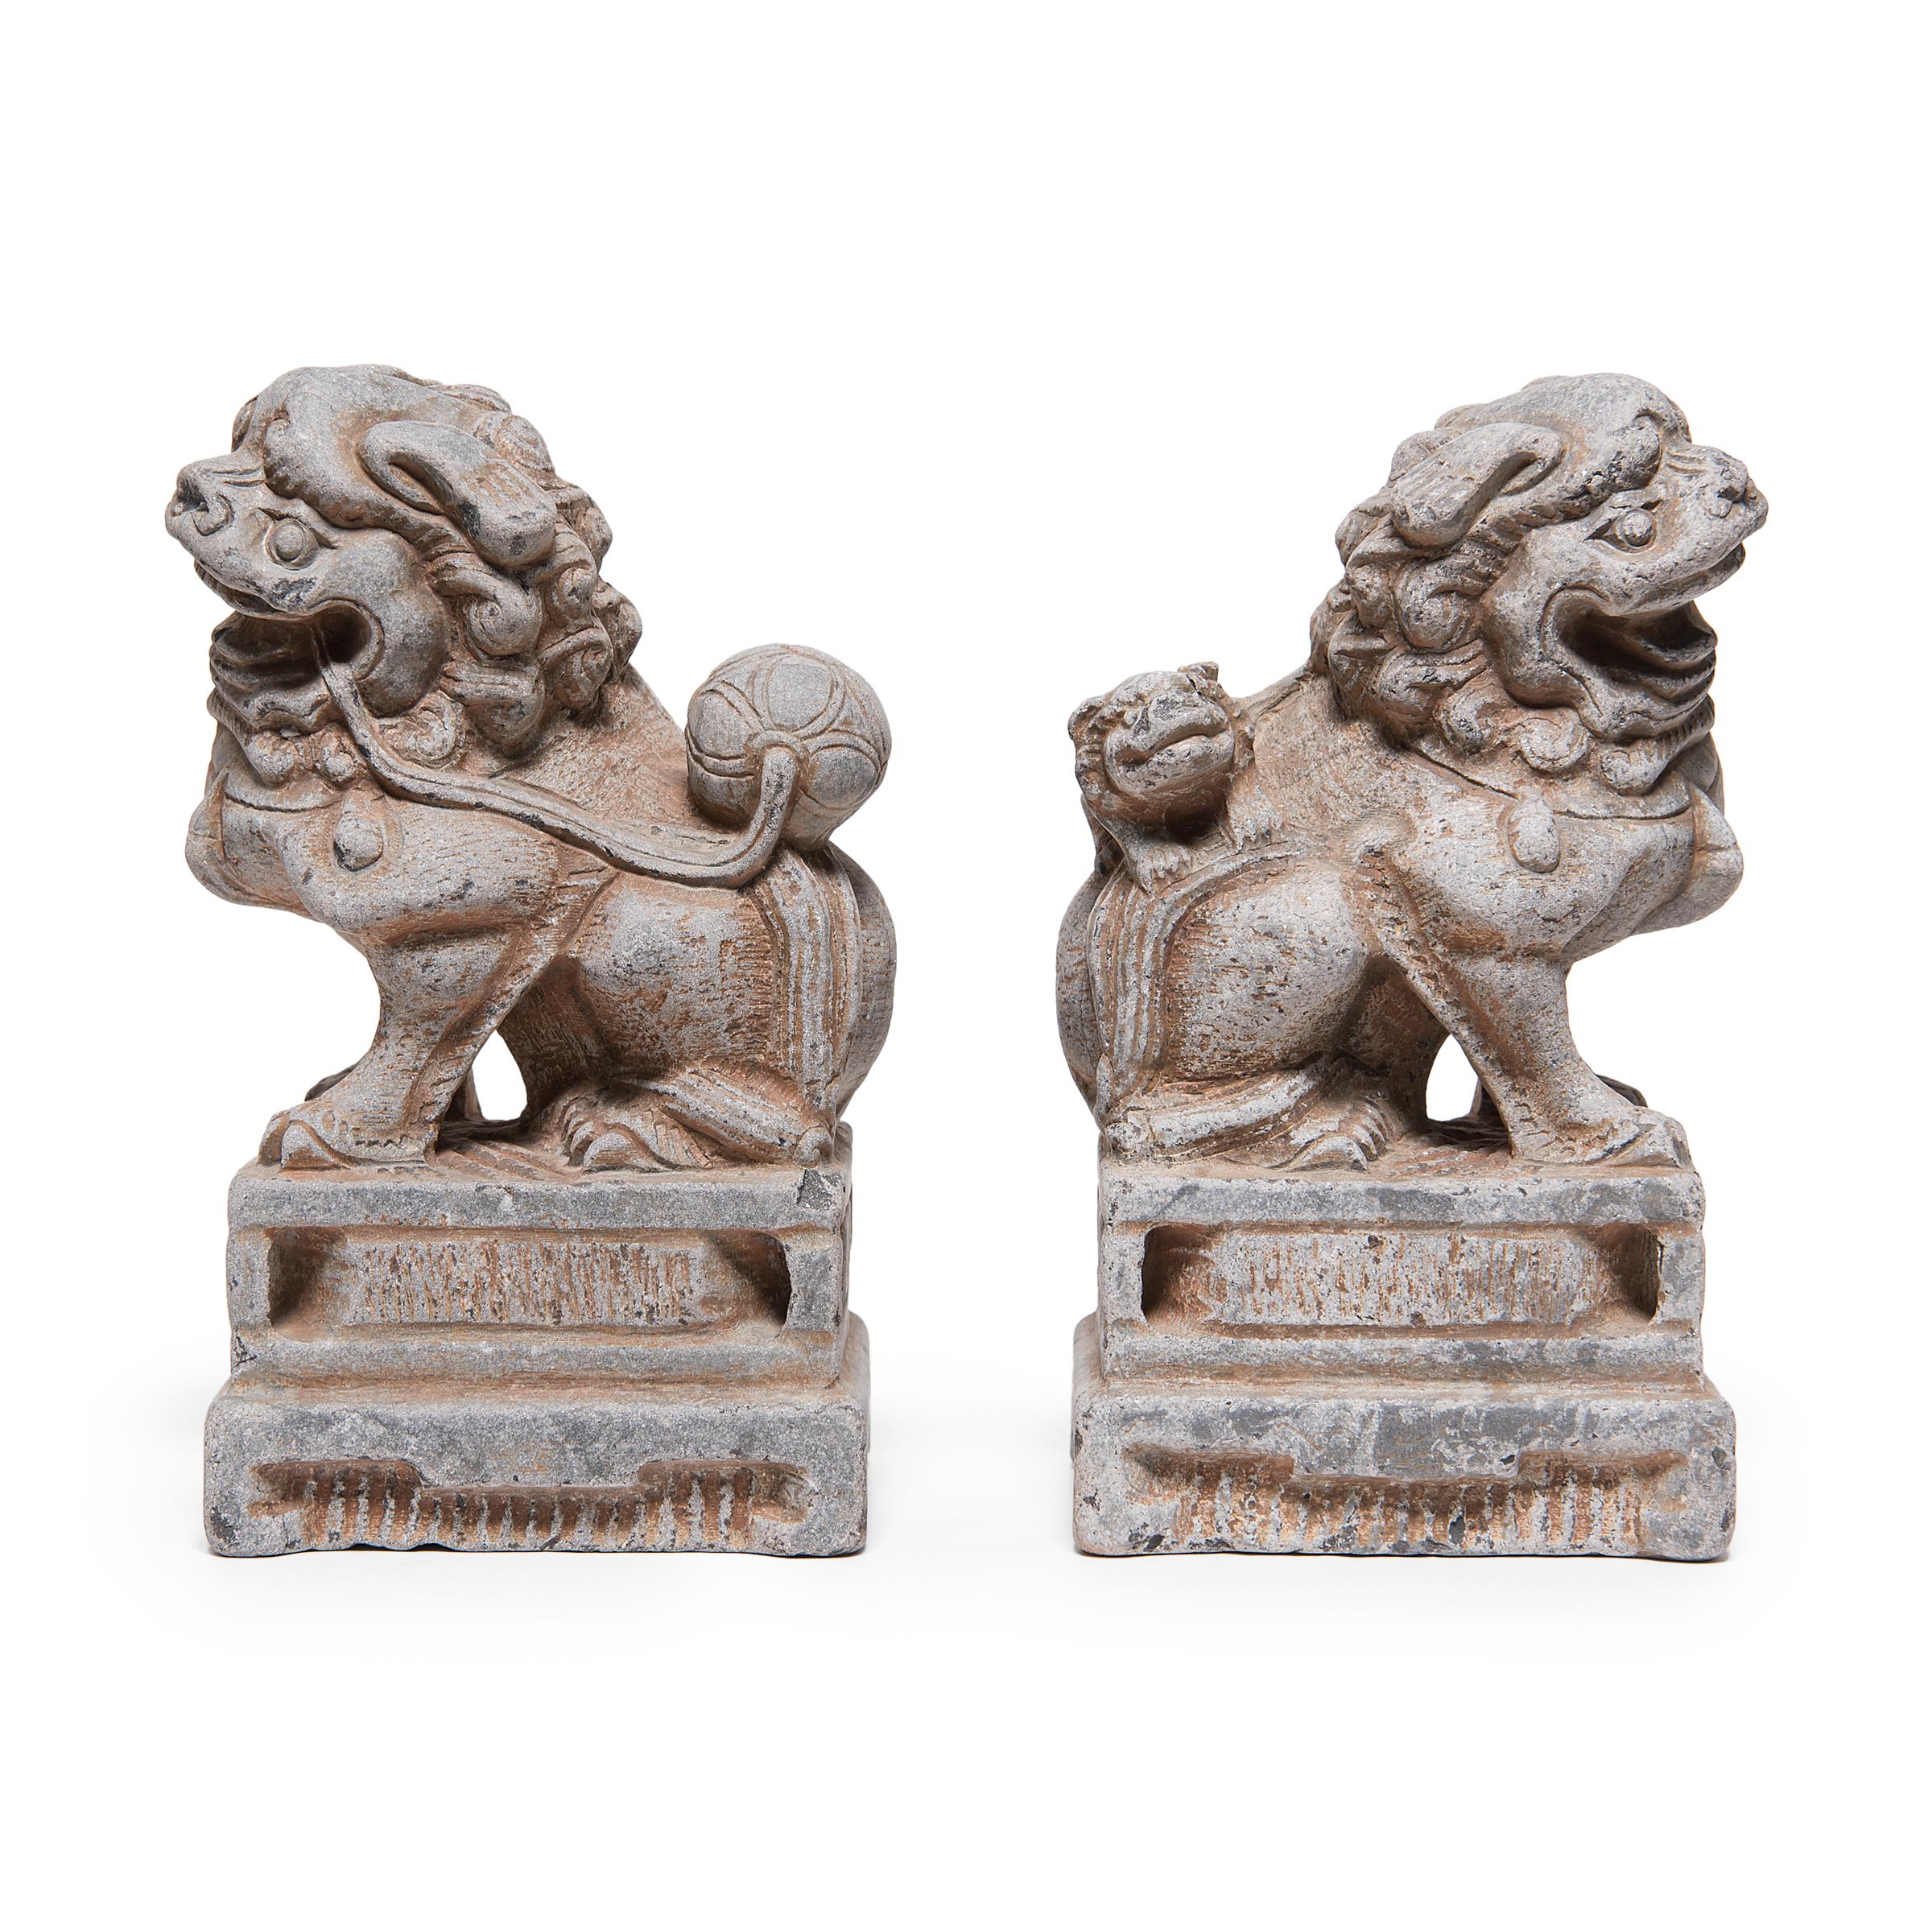 This pair of limestone fu dogs are hand-carved the traditional style, designed to flank the entryway to a home or garden. The mythical pair represents yin and yang, the balance of male and female energies. Carved with expressive facial features and